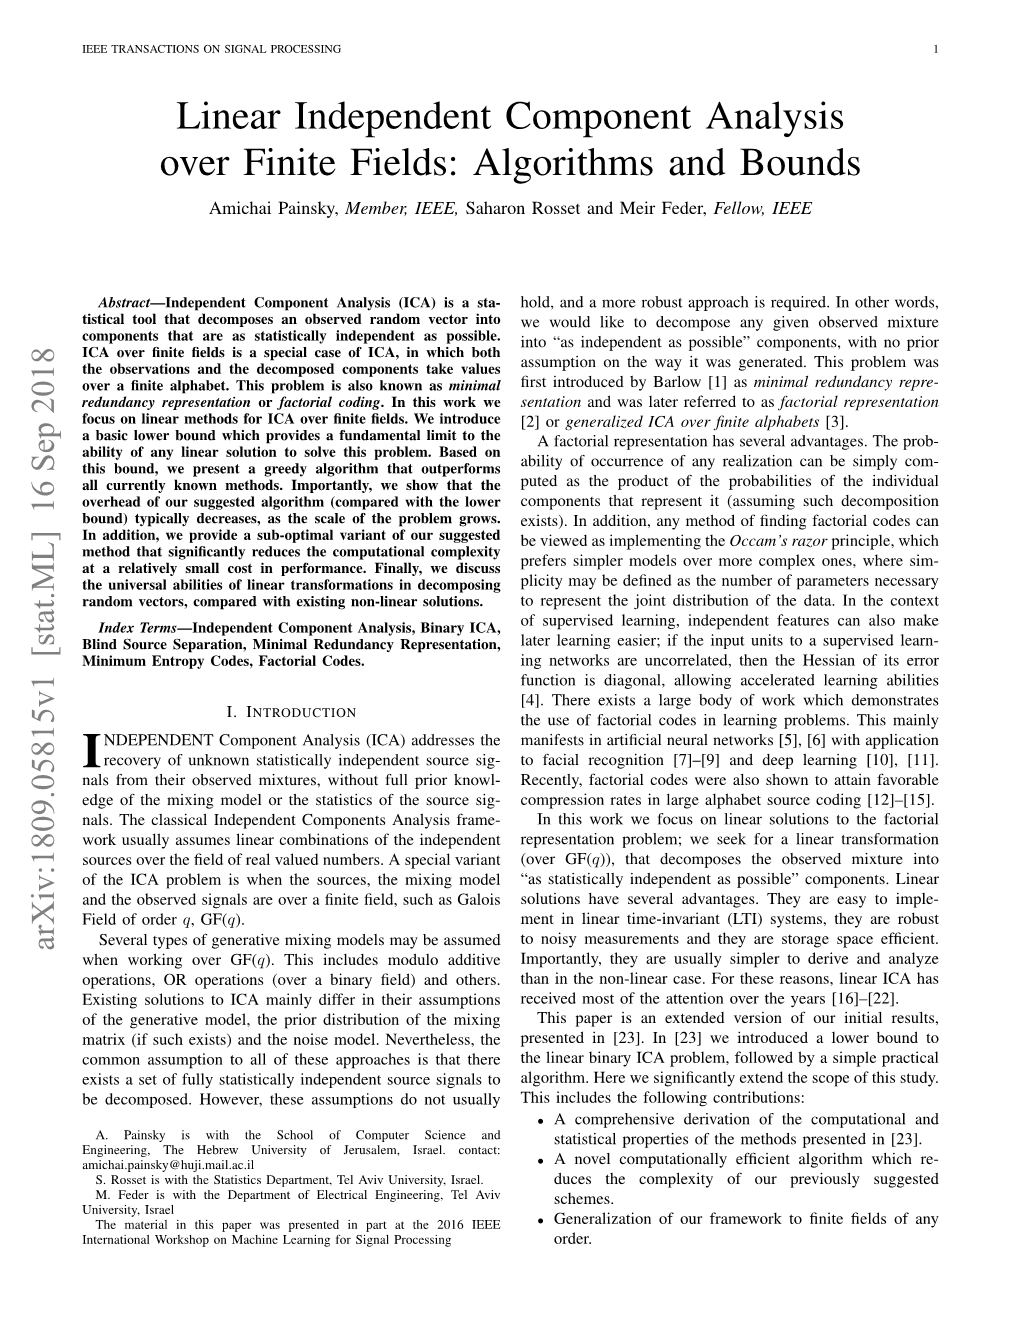 Linear Independent Component Analysis Over Finite Fields: Algorithms and Bounds Amichai Painsky, Member, IEEE, Saharon Rosset and Meir Feder, Fellow, IEEE